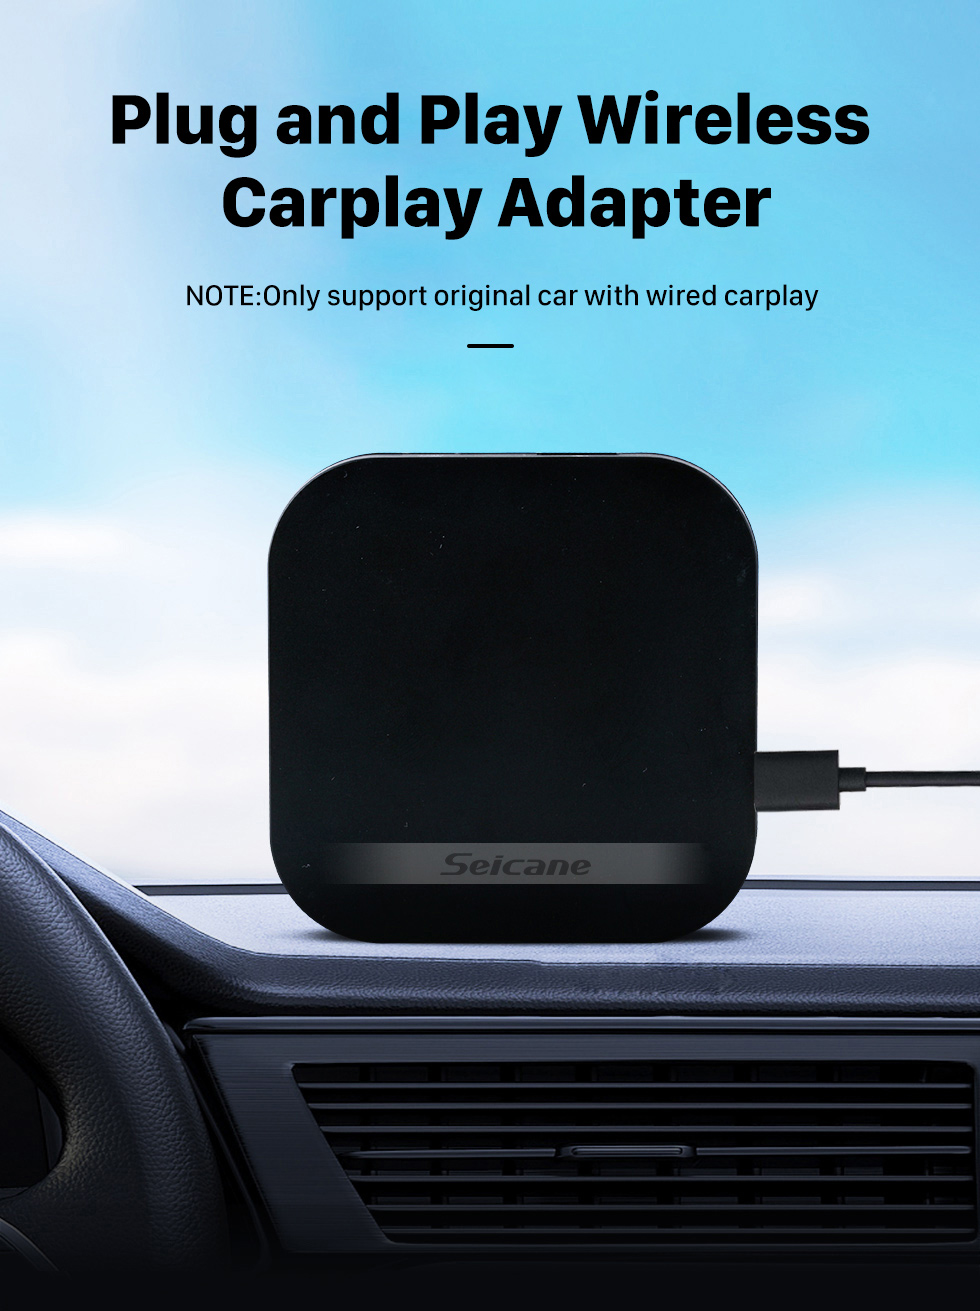 Seicane Plug and Play Wireless Carplay Adapter for Factory Wired Carplay support BWM Benz Audi VW